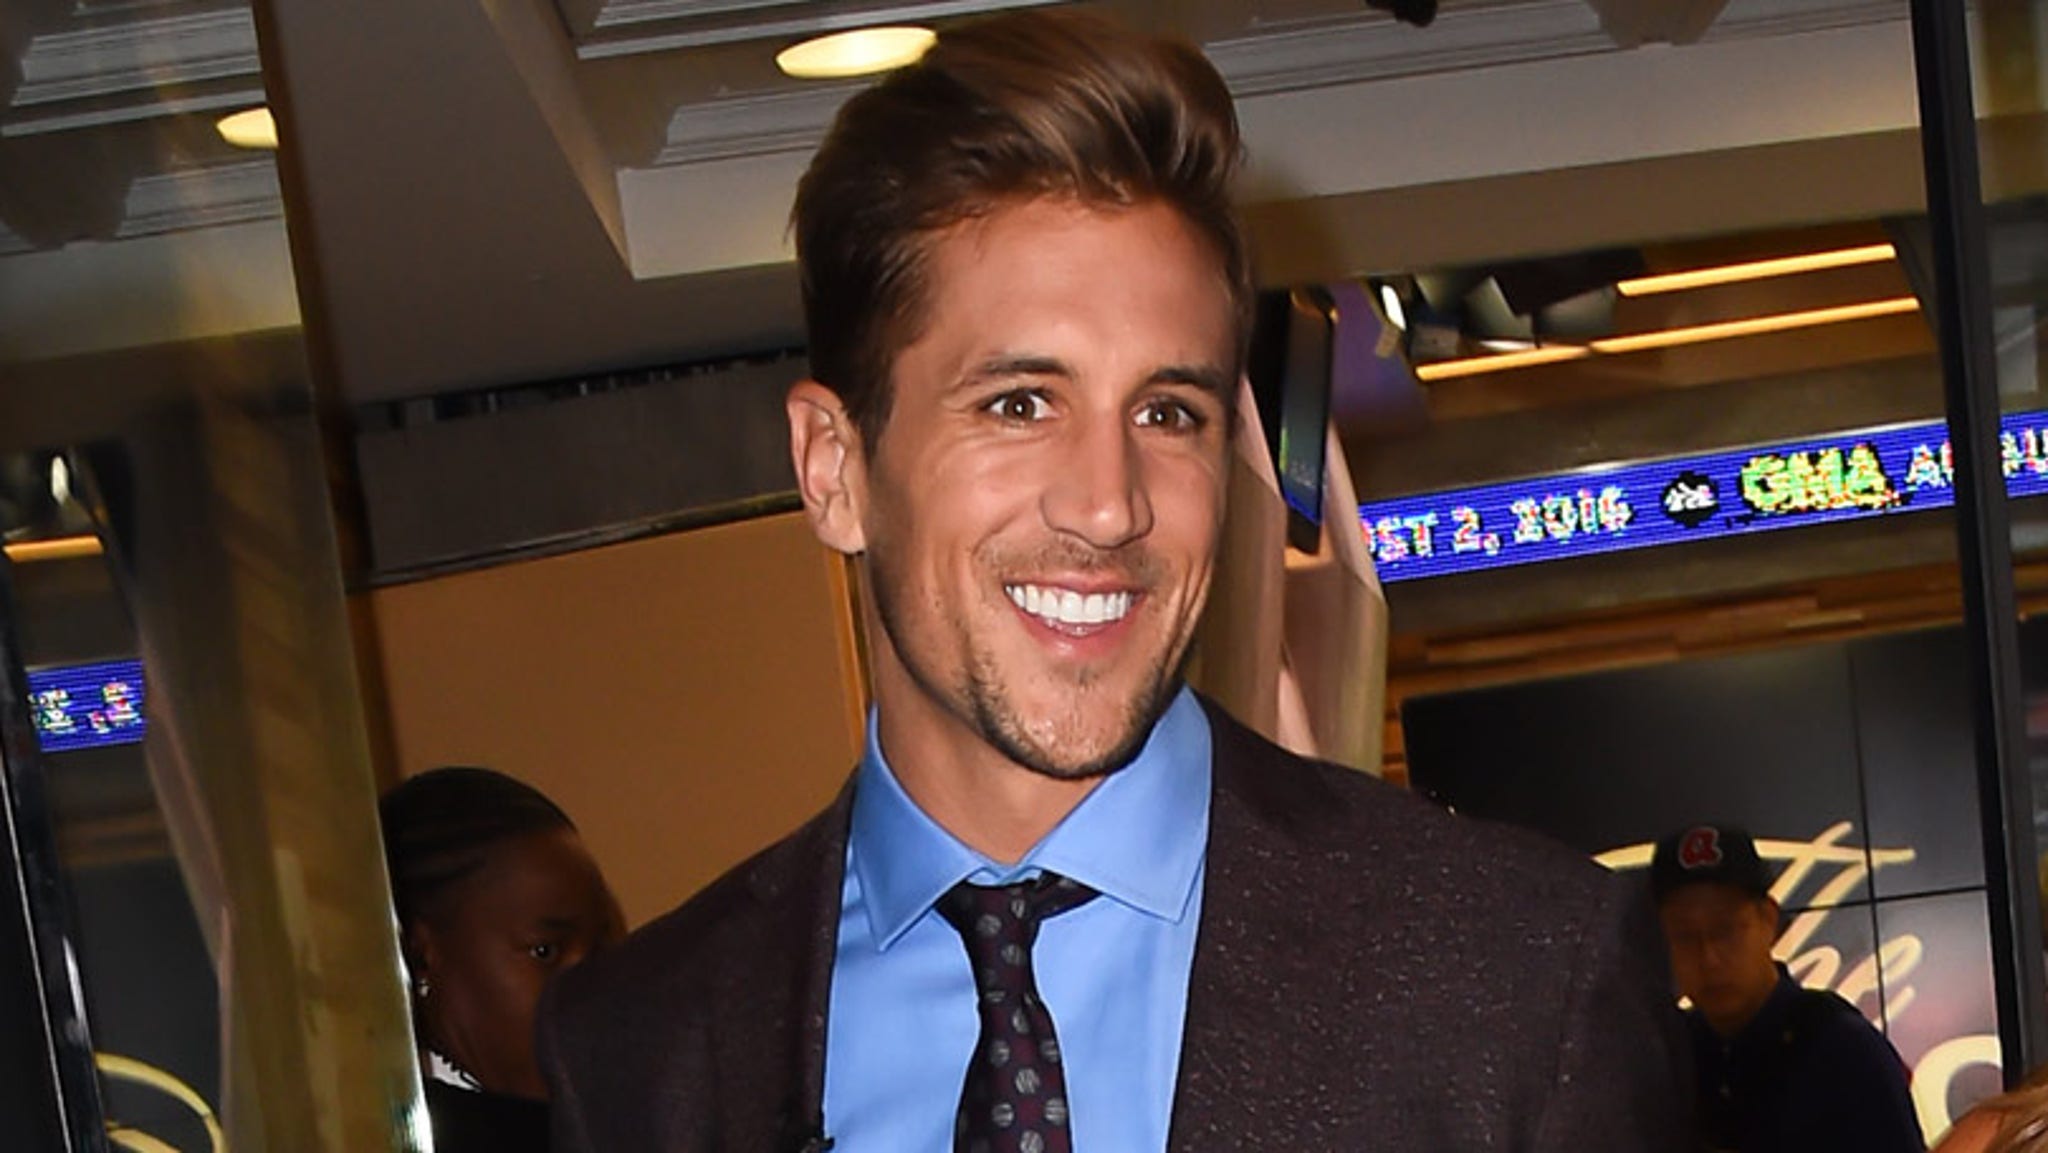 Jordan Rodgers Ex Insinuates He Cheated On Her With Pitch Perfect 2 Star